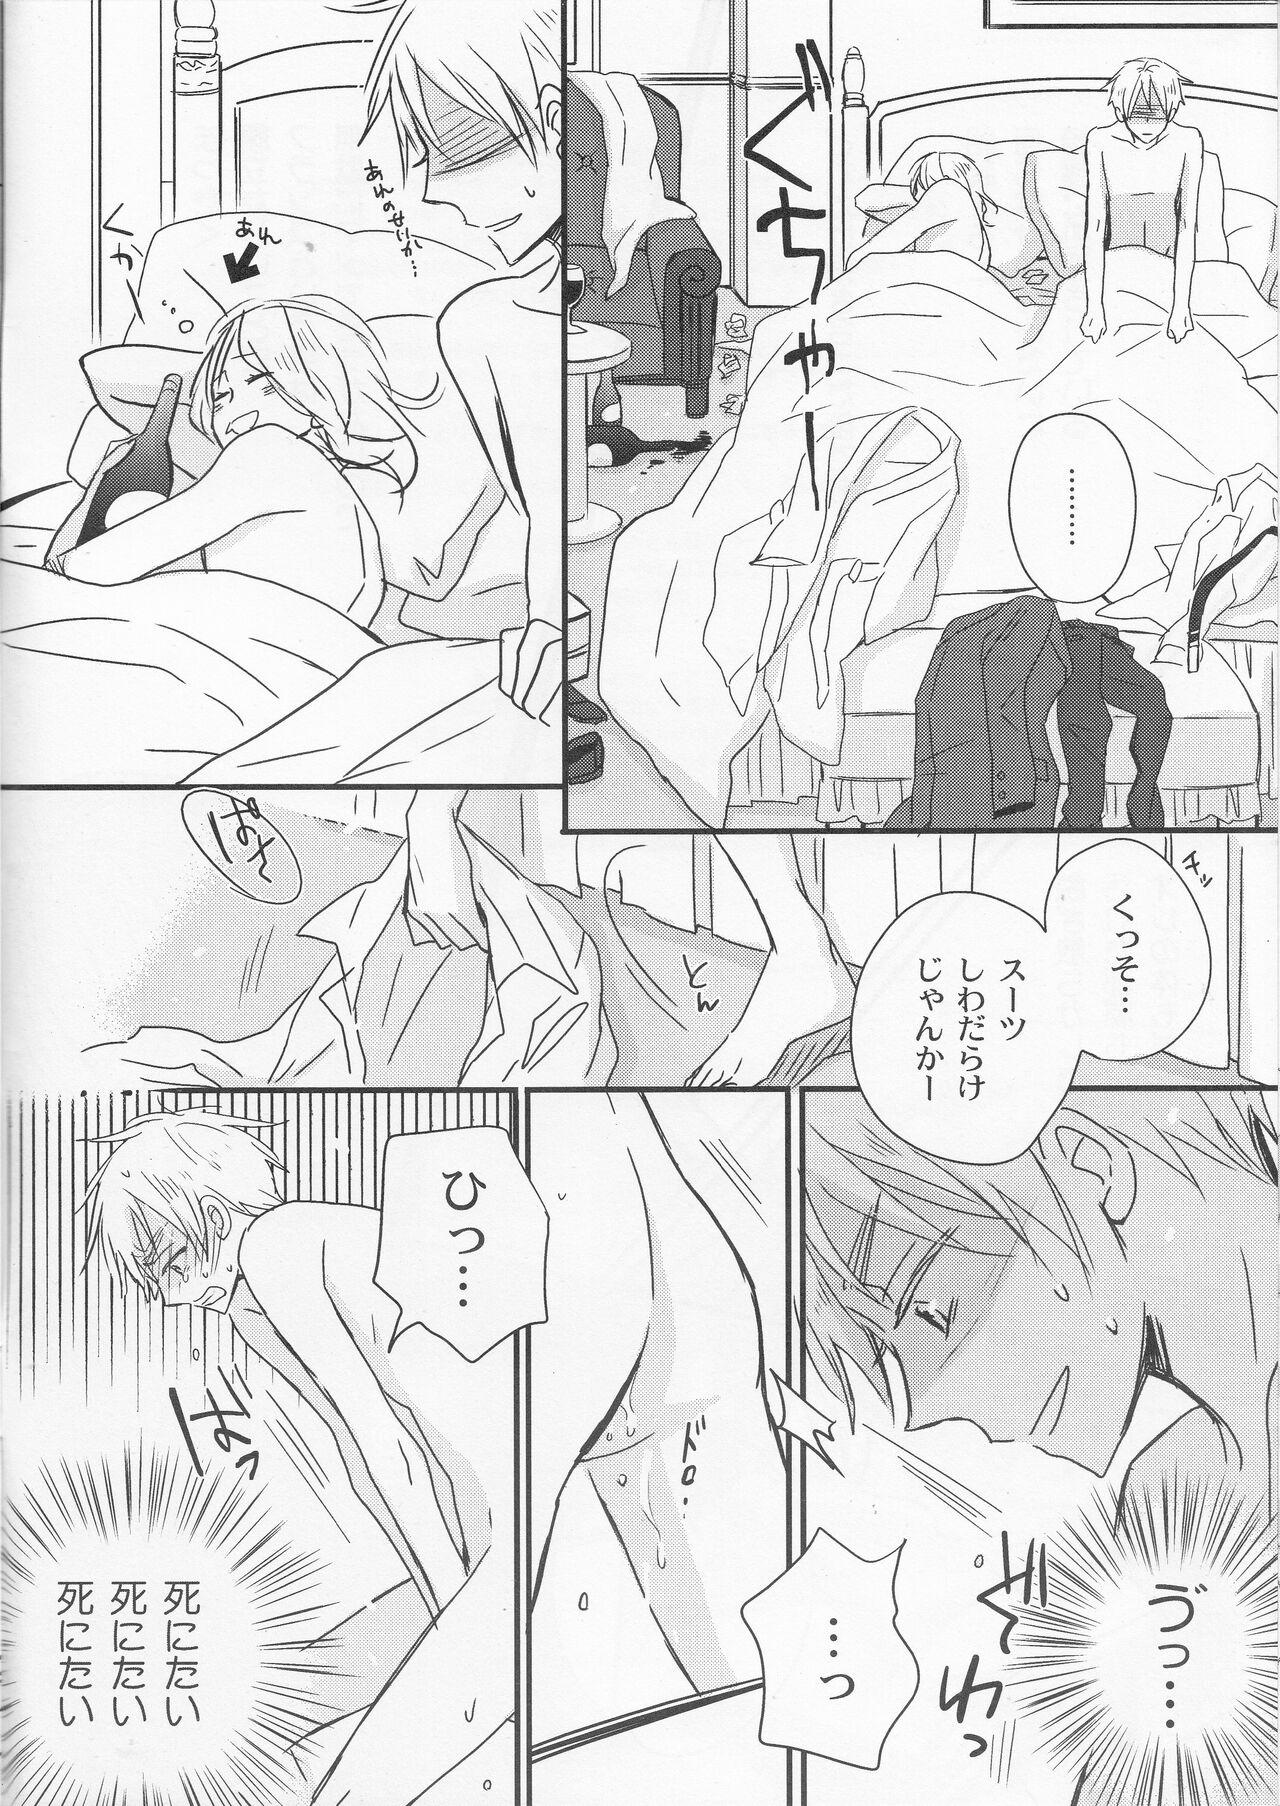 Sissy unknown title - Axis powers hetalia Eating Pussy - Page 5